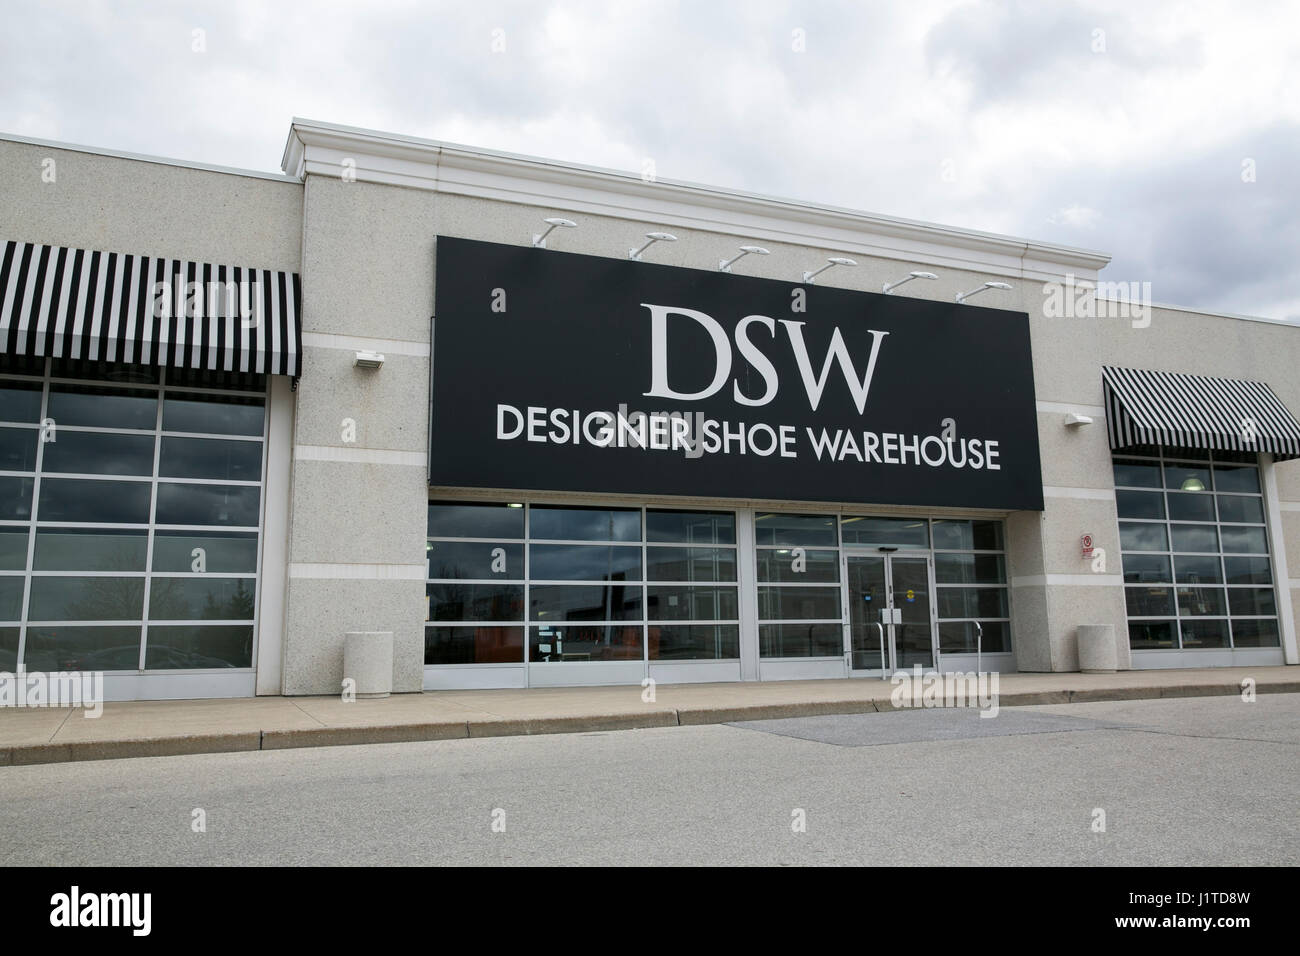 A logo sign outside of a DSW Designer Shoe Warehouse retail store in Mississauga, Ontario, Canada, on April 16, 2017. Stock Photo